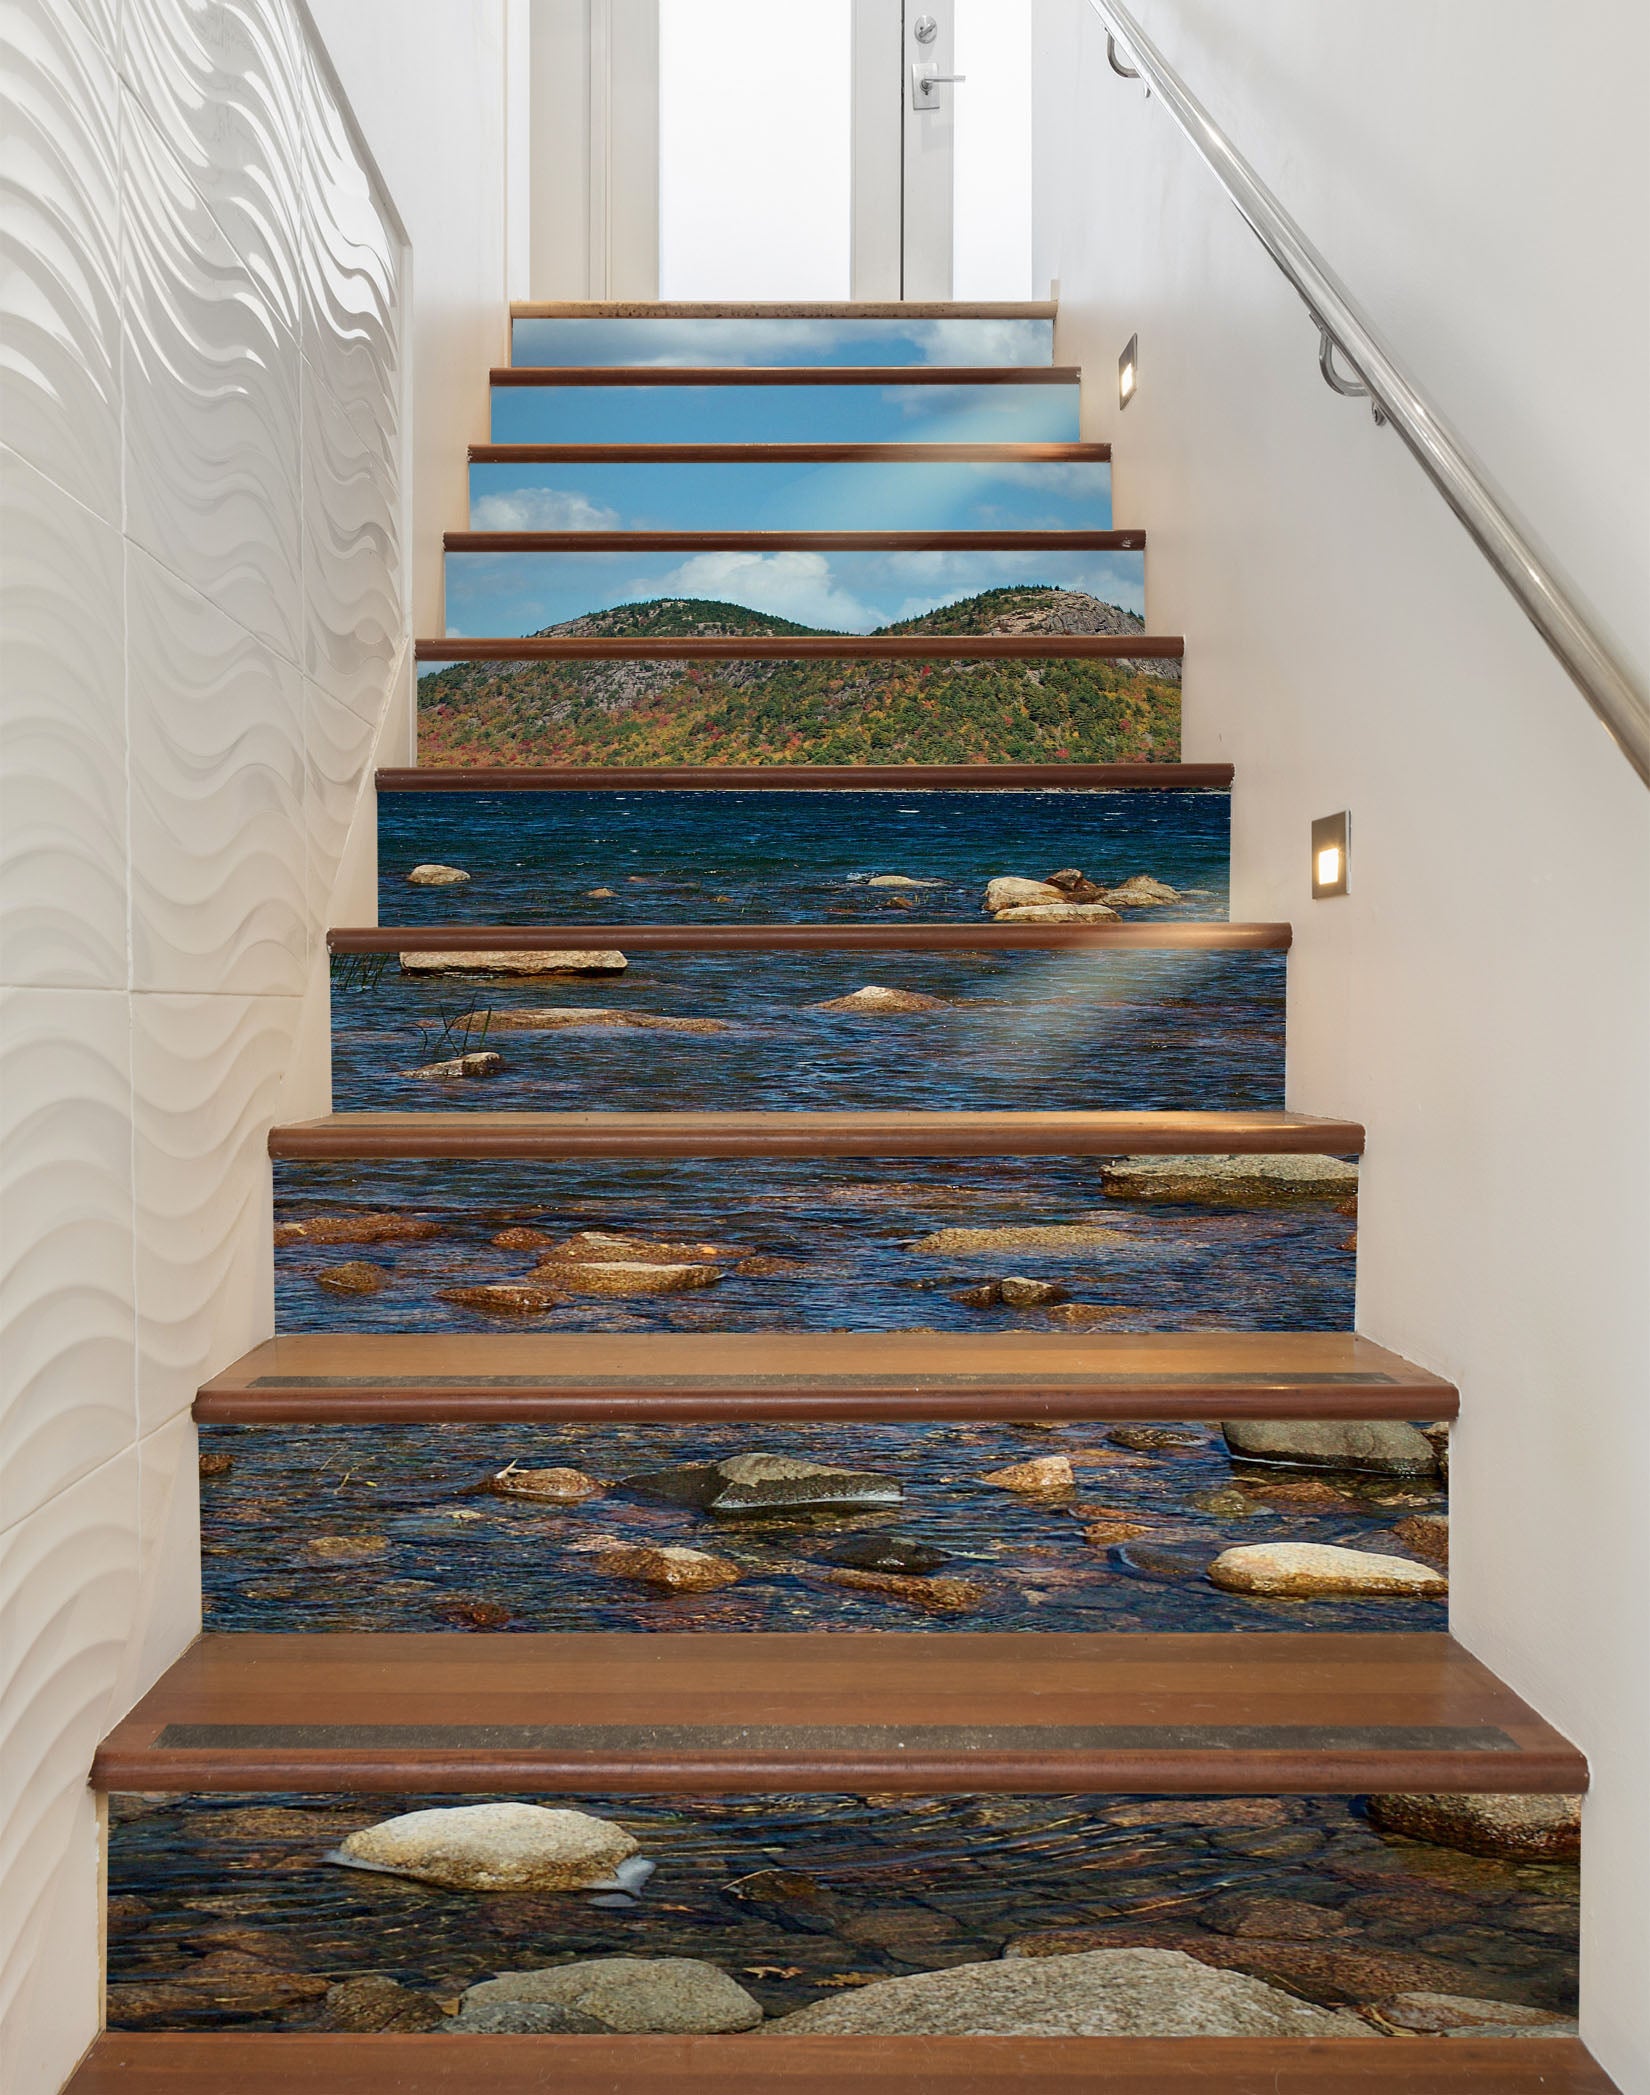 3D Lakeside Stone 9499 Kathy Barefield Stair Risers